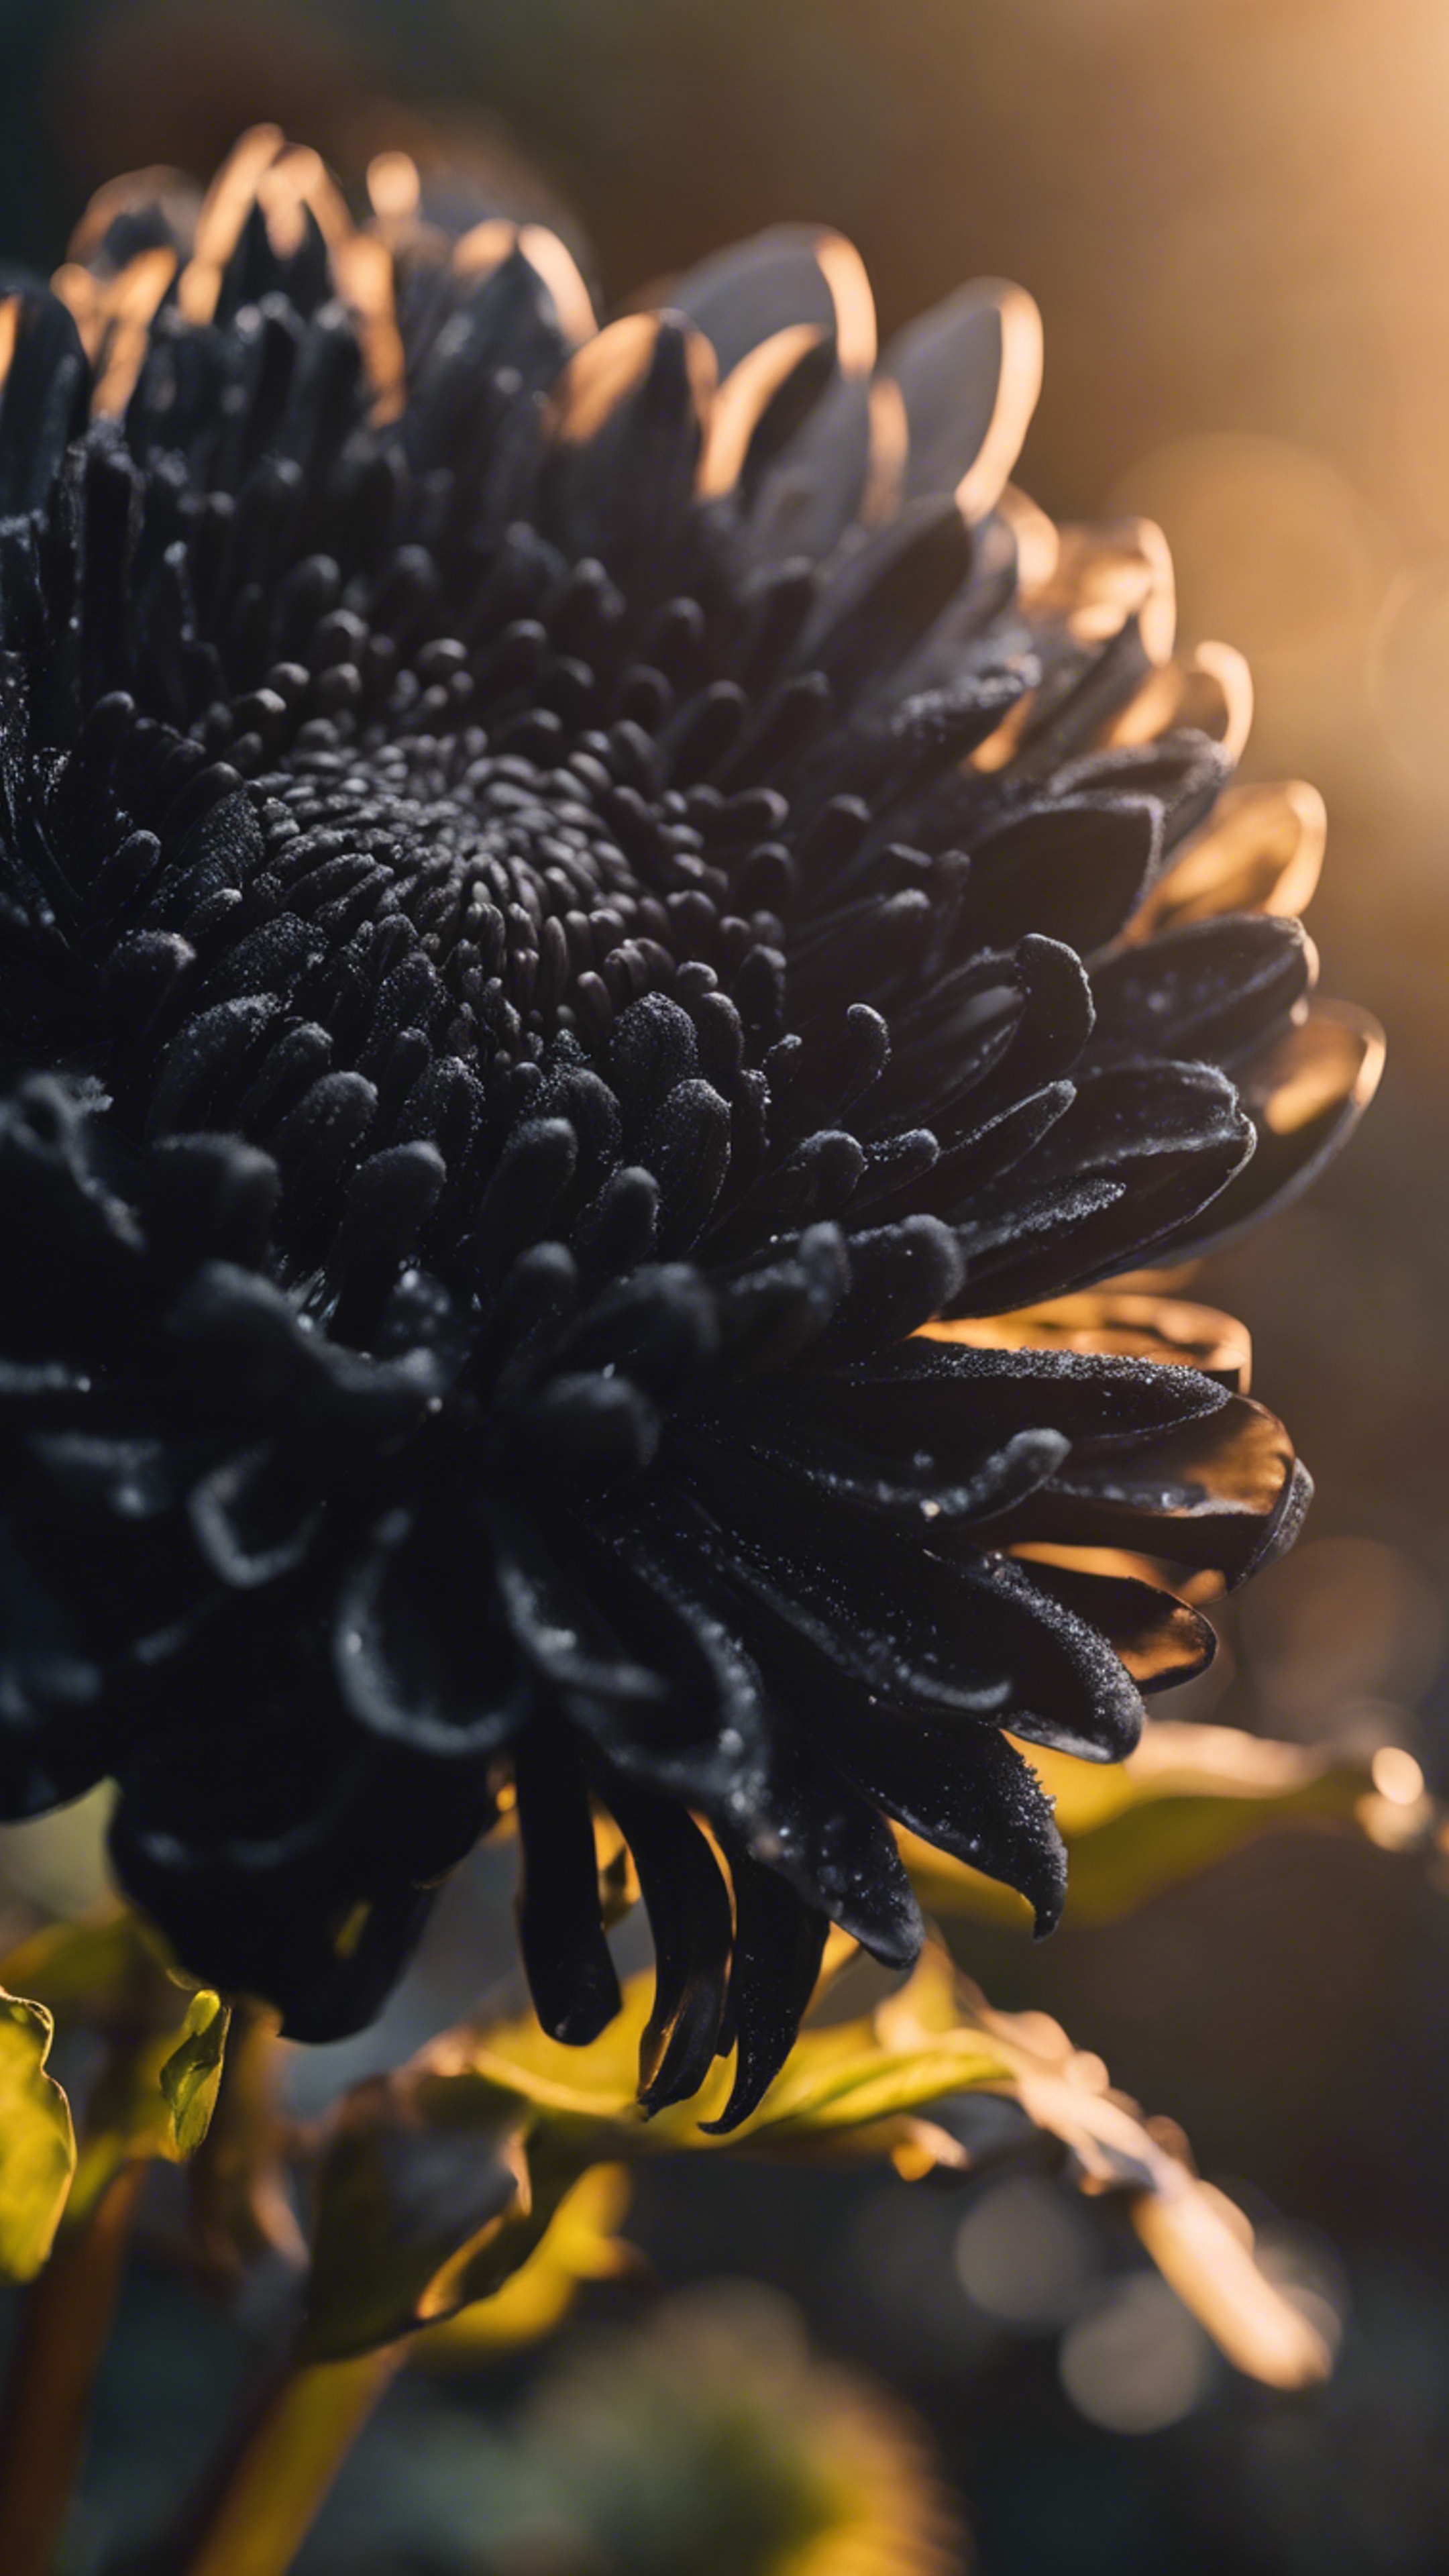 An ethereal black chrysanthemum with intricate petals against a backdrop of the setting sun. ផ្ទាំង​រូបភាព[4b40c3df292a42548d77]